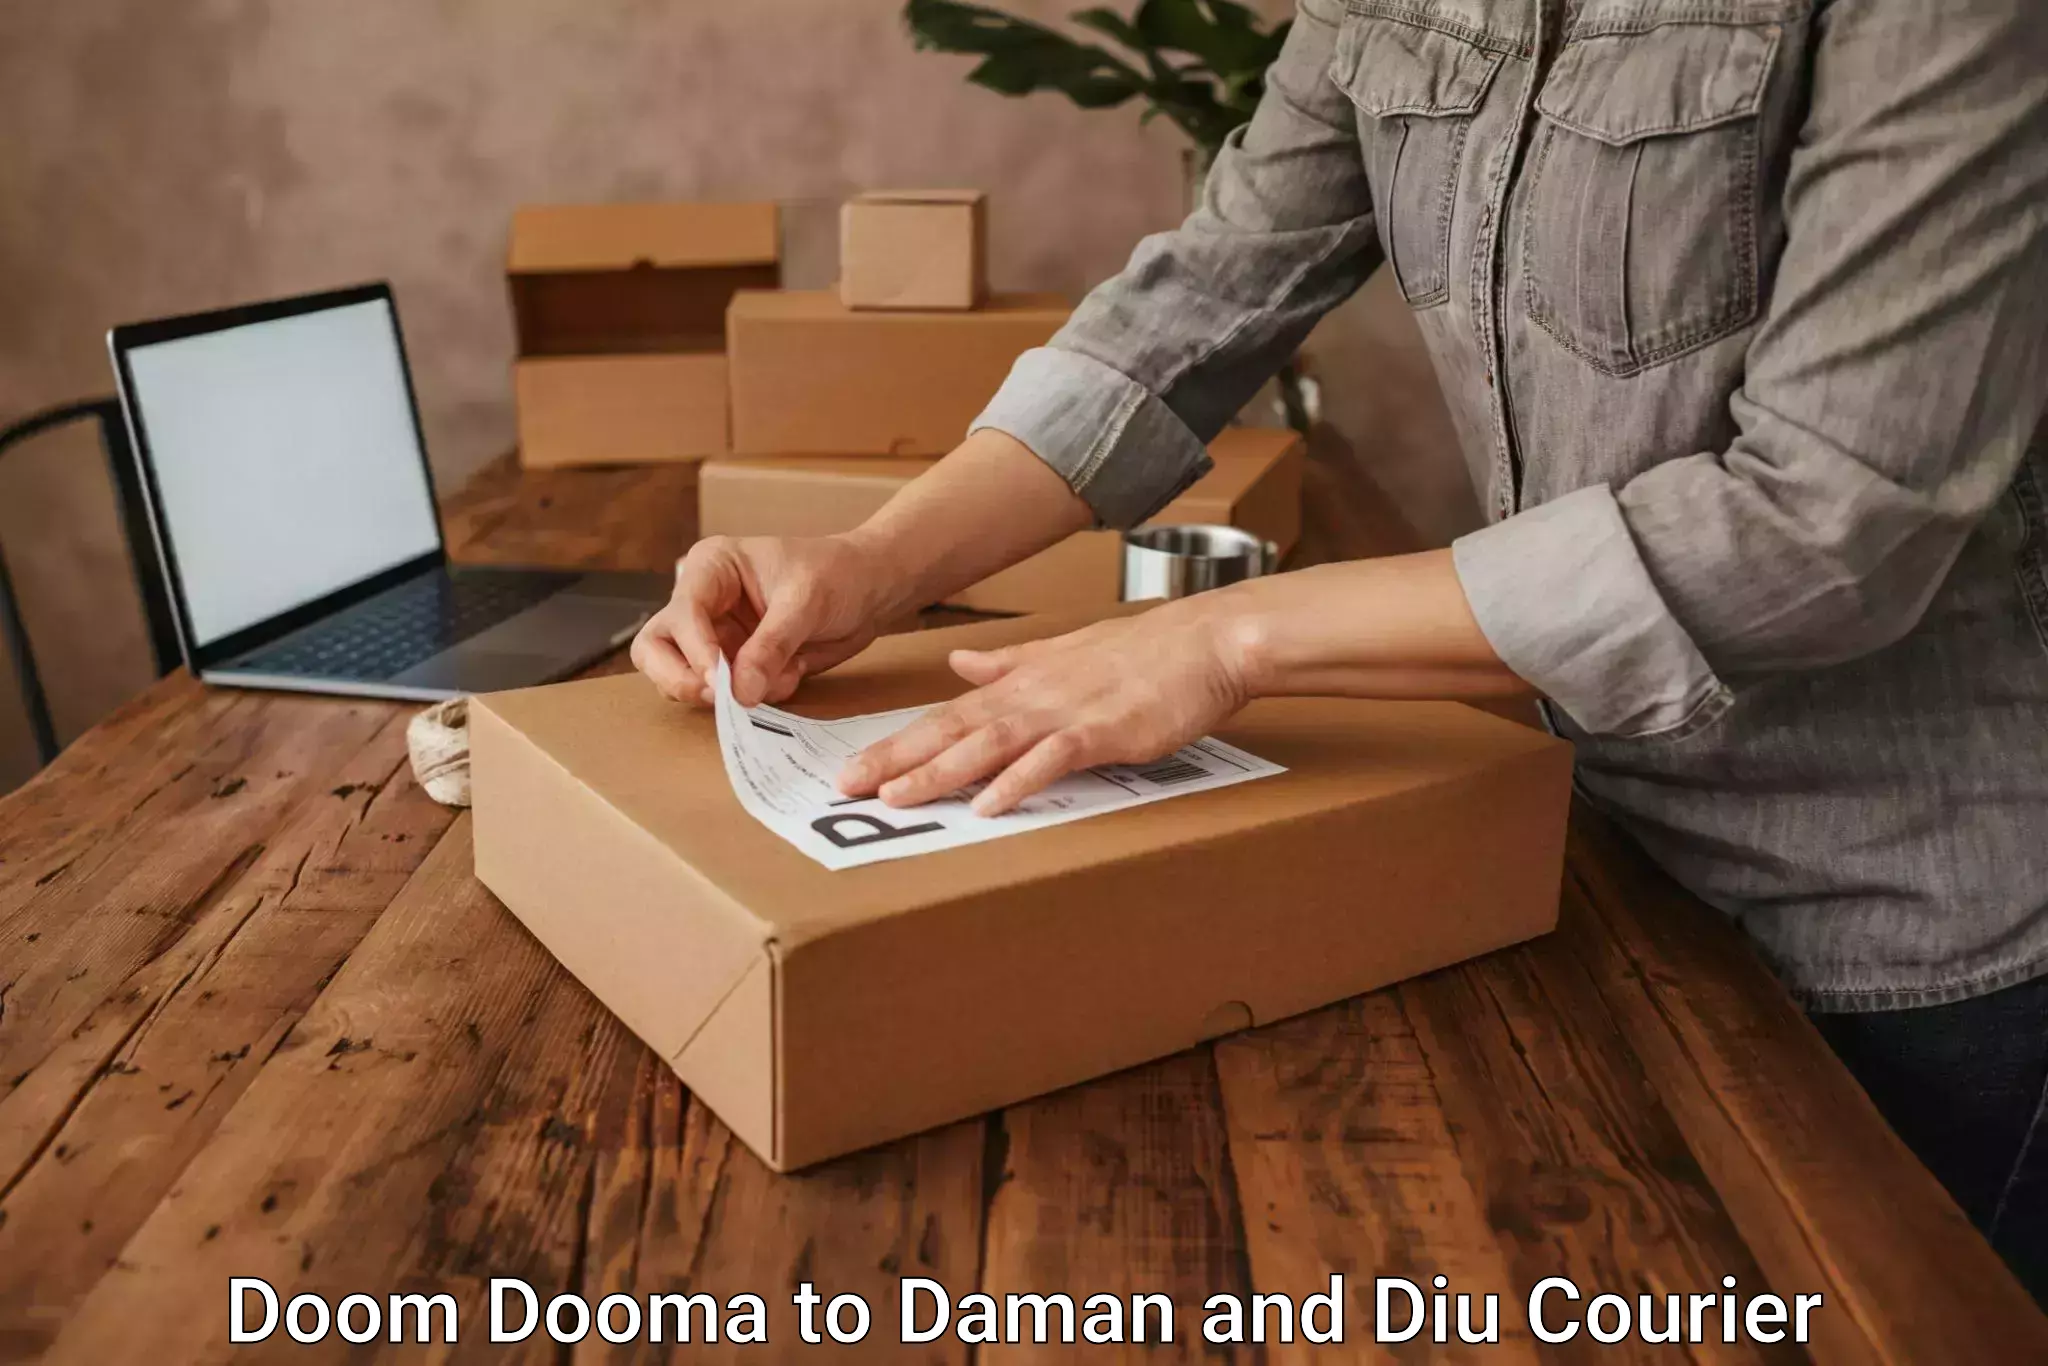 Round-the-clock parcel delivery Doom Dooma to Daman